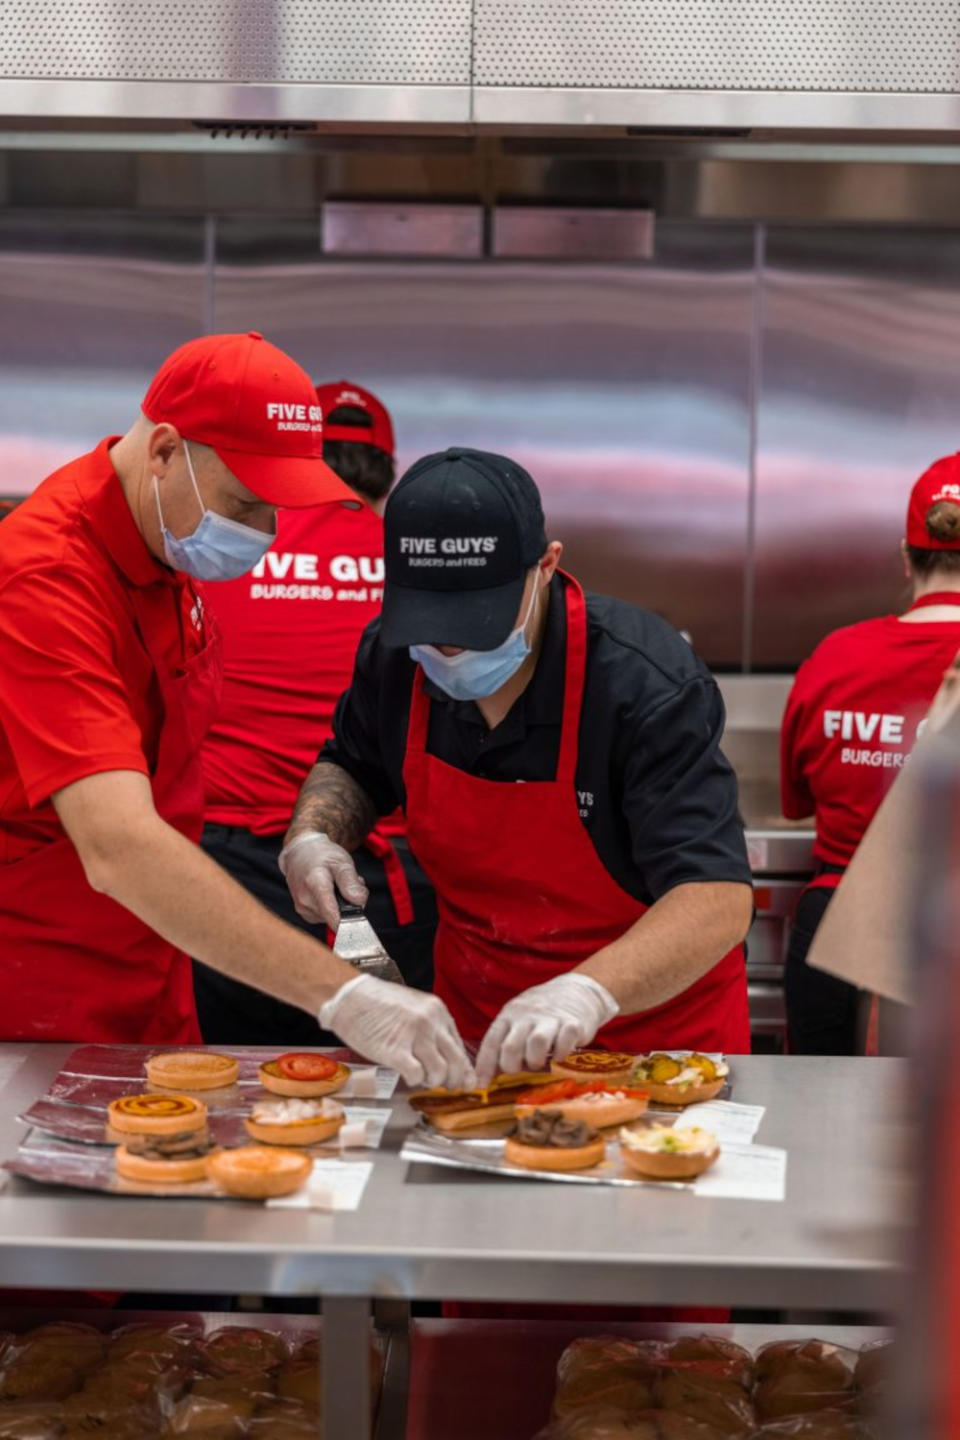 Five Guys’ buns are ‘freshly baked every day’ and warmed on the grill to get ‘the perfect toast’. — SoyaCincau pic